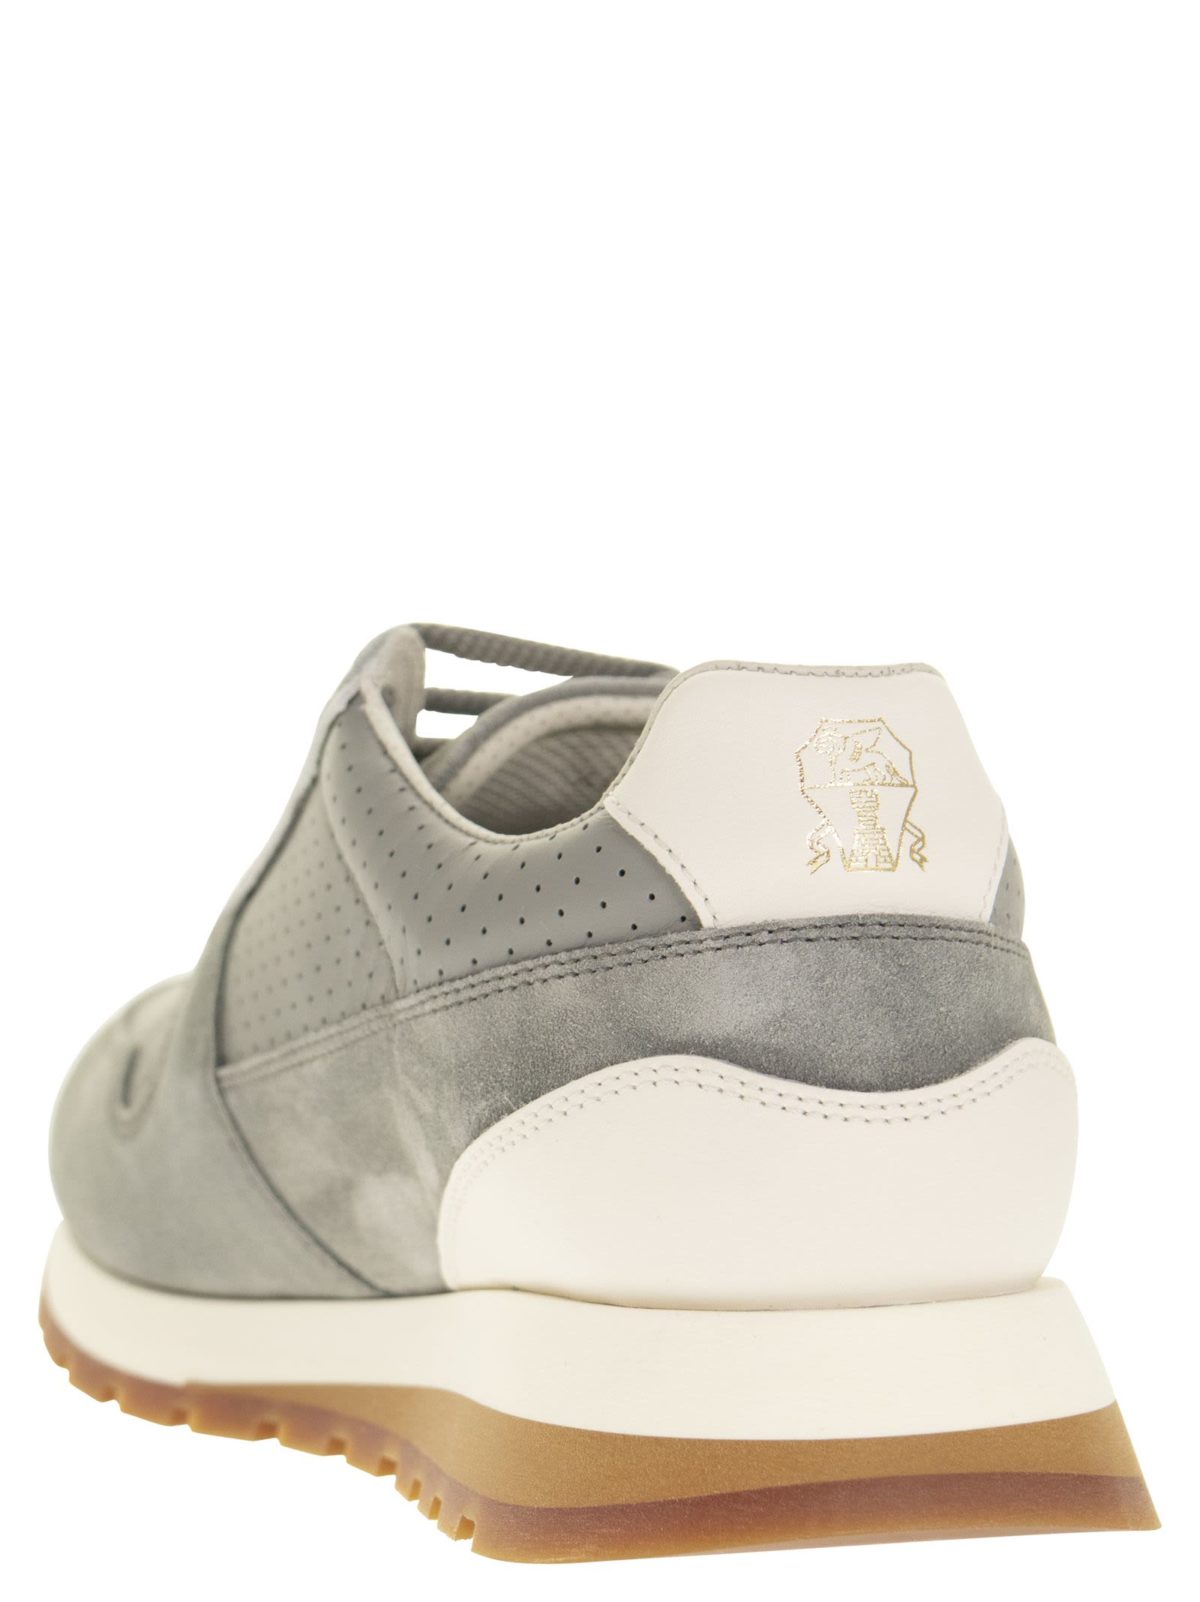 Suede and Leather Sneakers - Bellettini.com